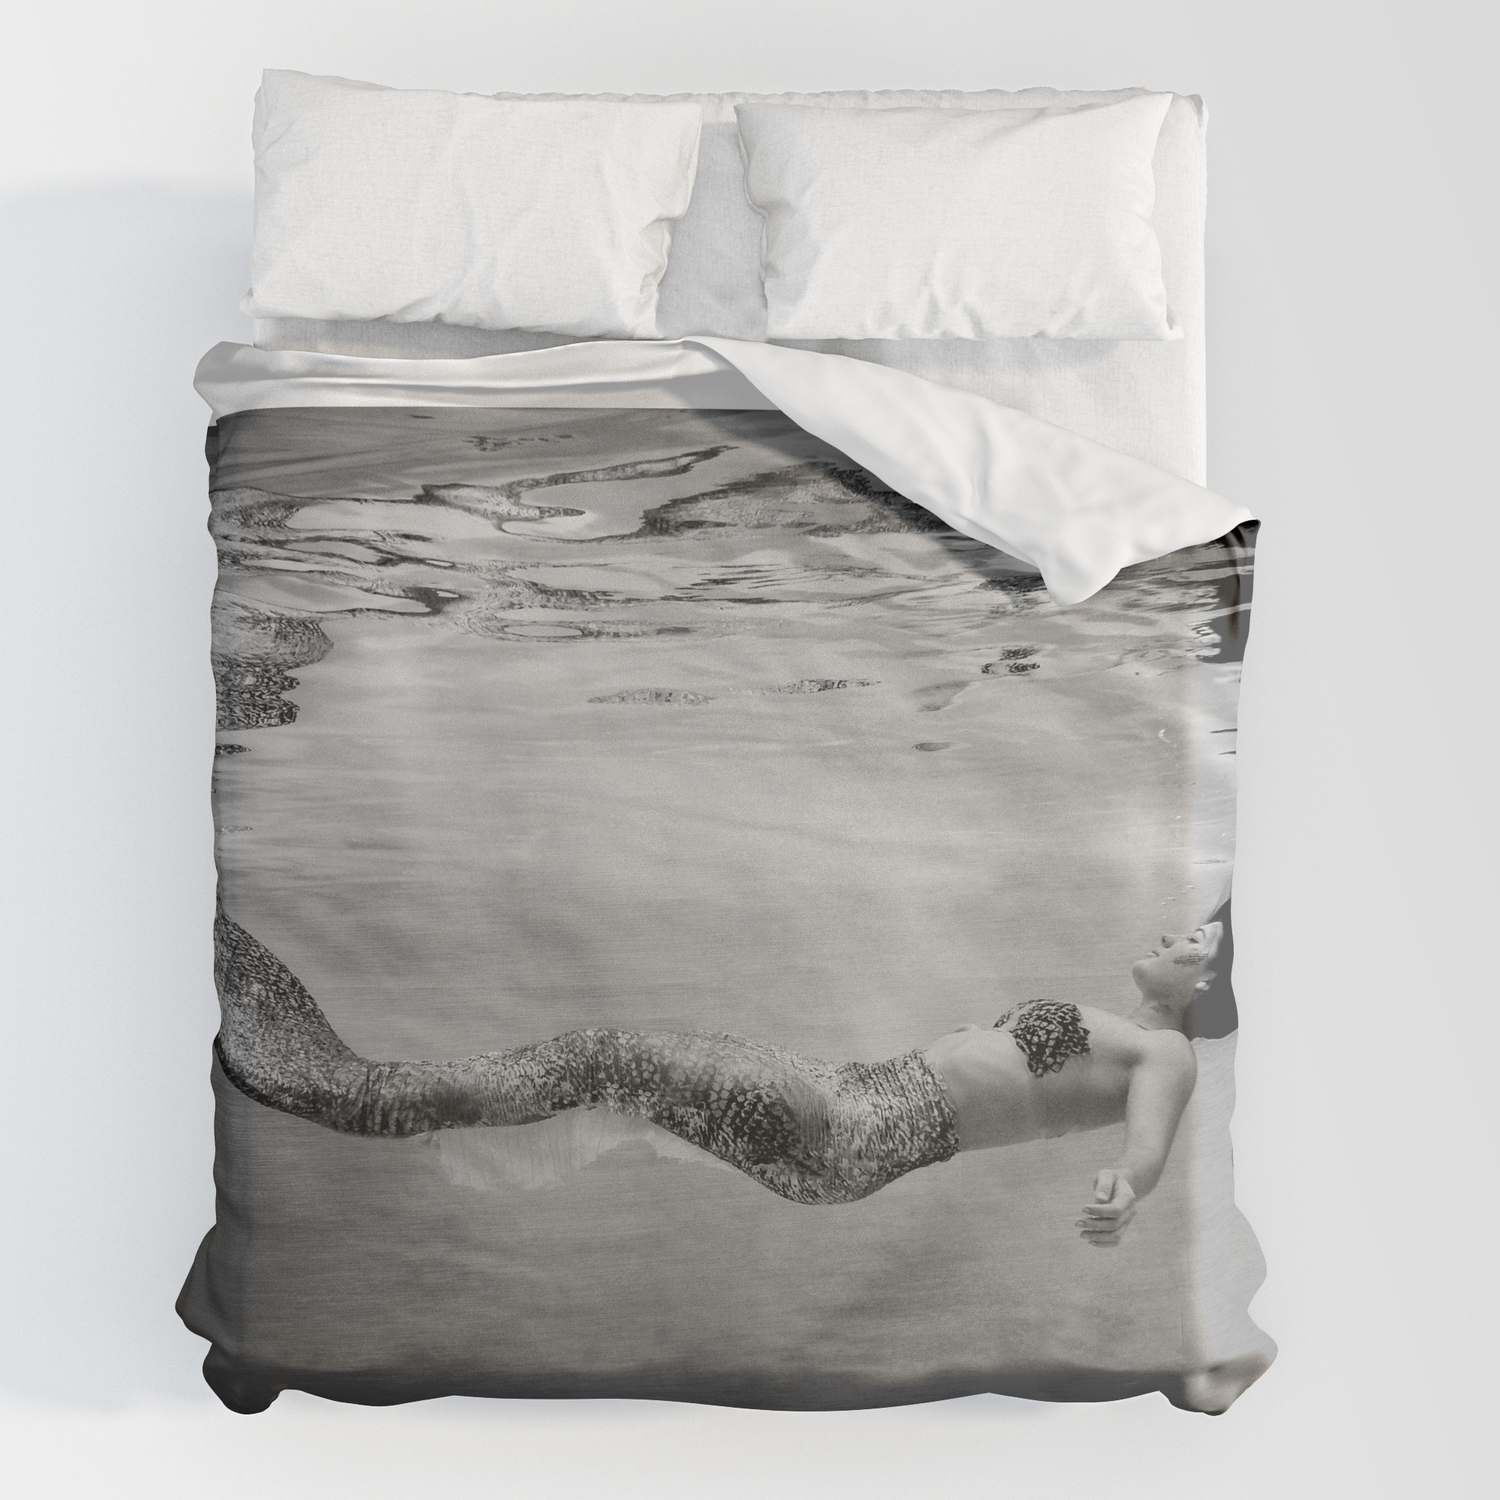 Mermaid Among Us Float Duvet Cover By, What Us A Duvet Cover